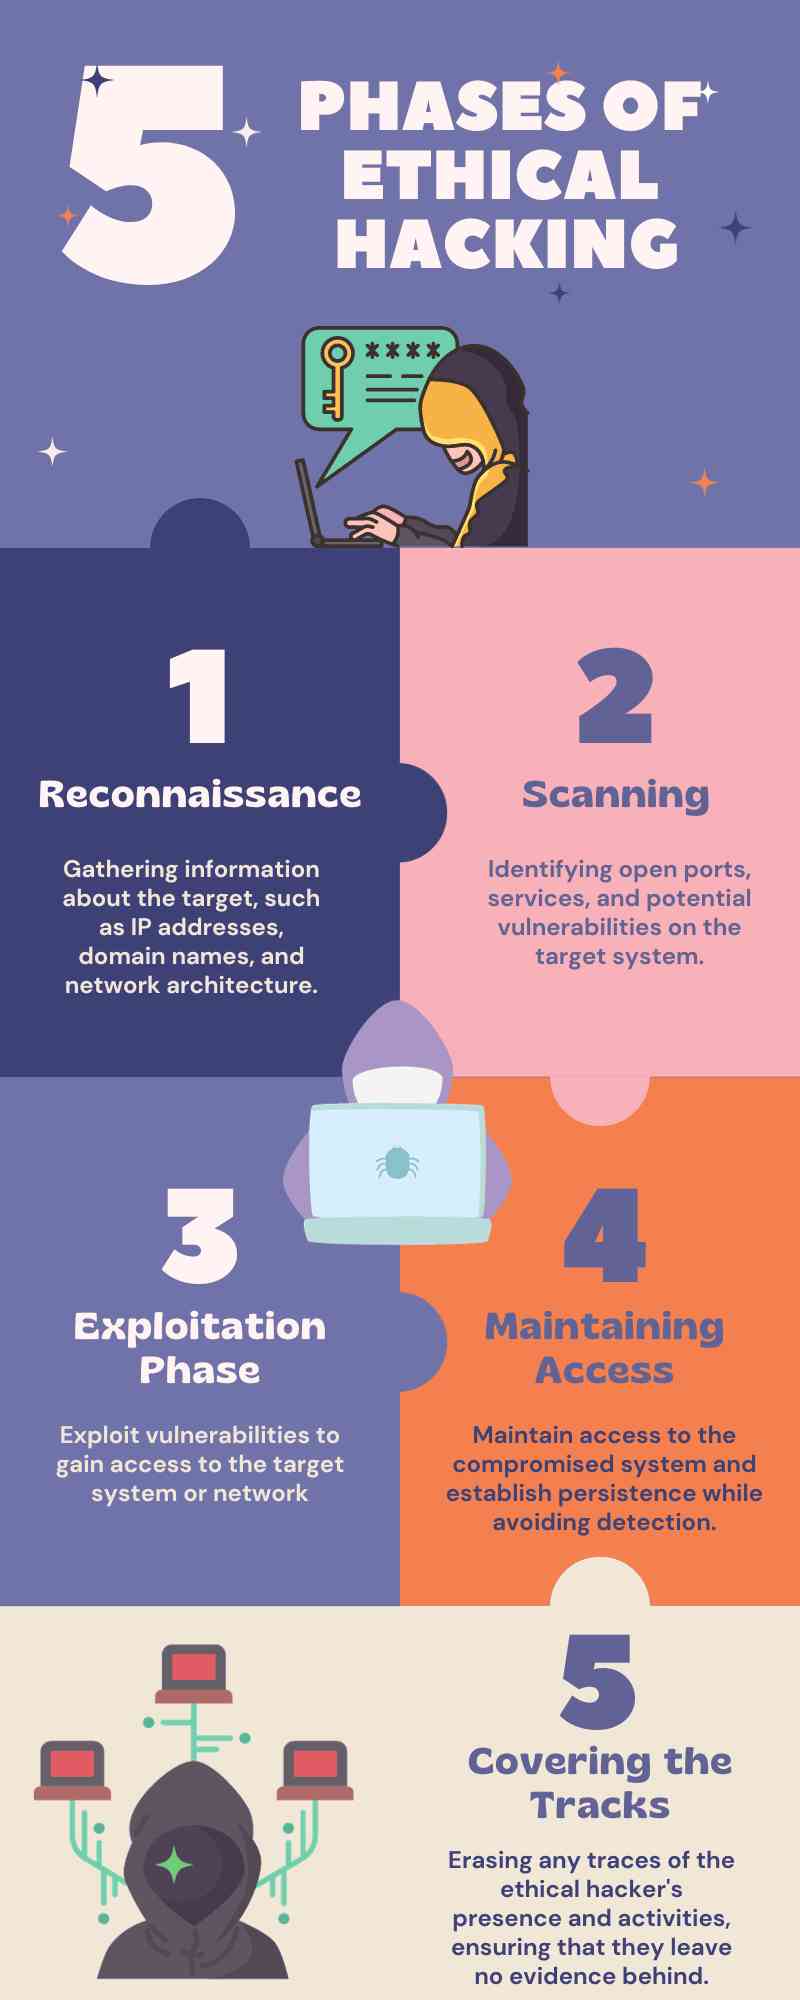 5 Different Phases of Ethical Hacking